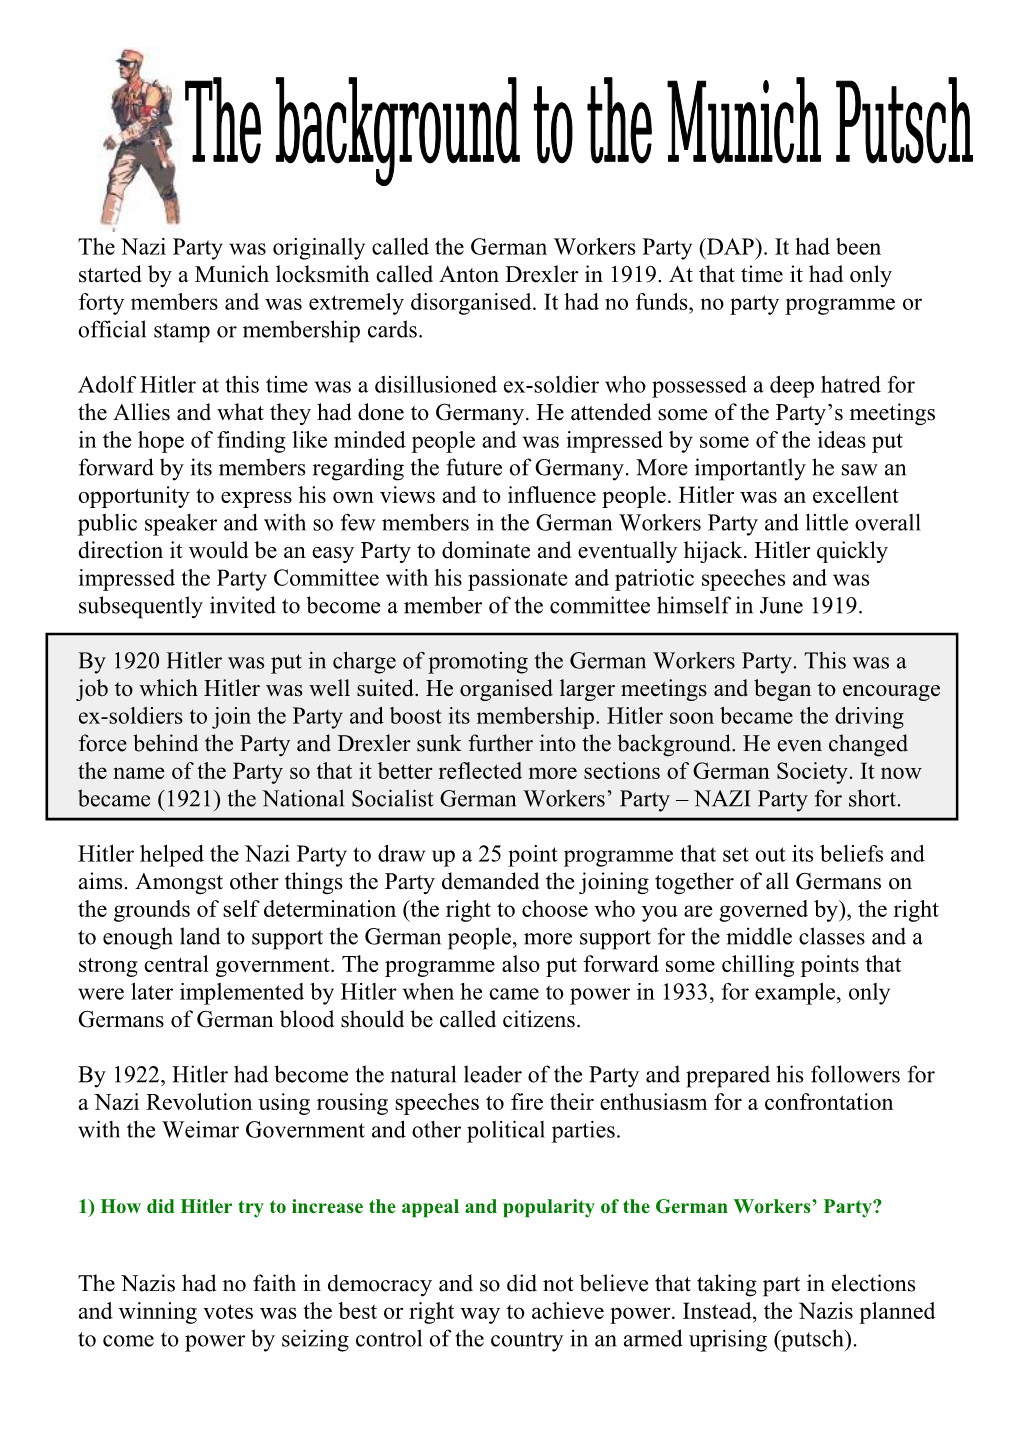 The Nazi Party Was Originally Called the German Workers Party (DAP). It Had Been Started